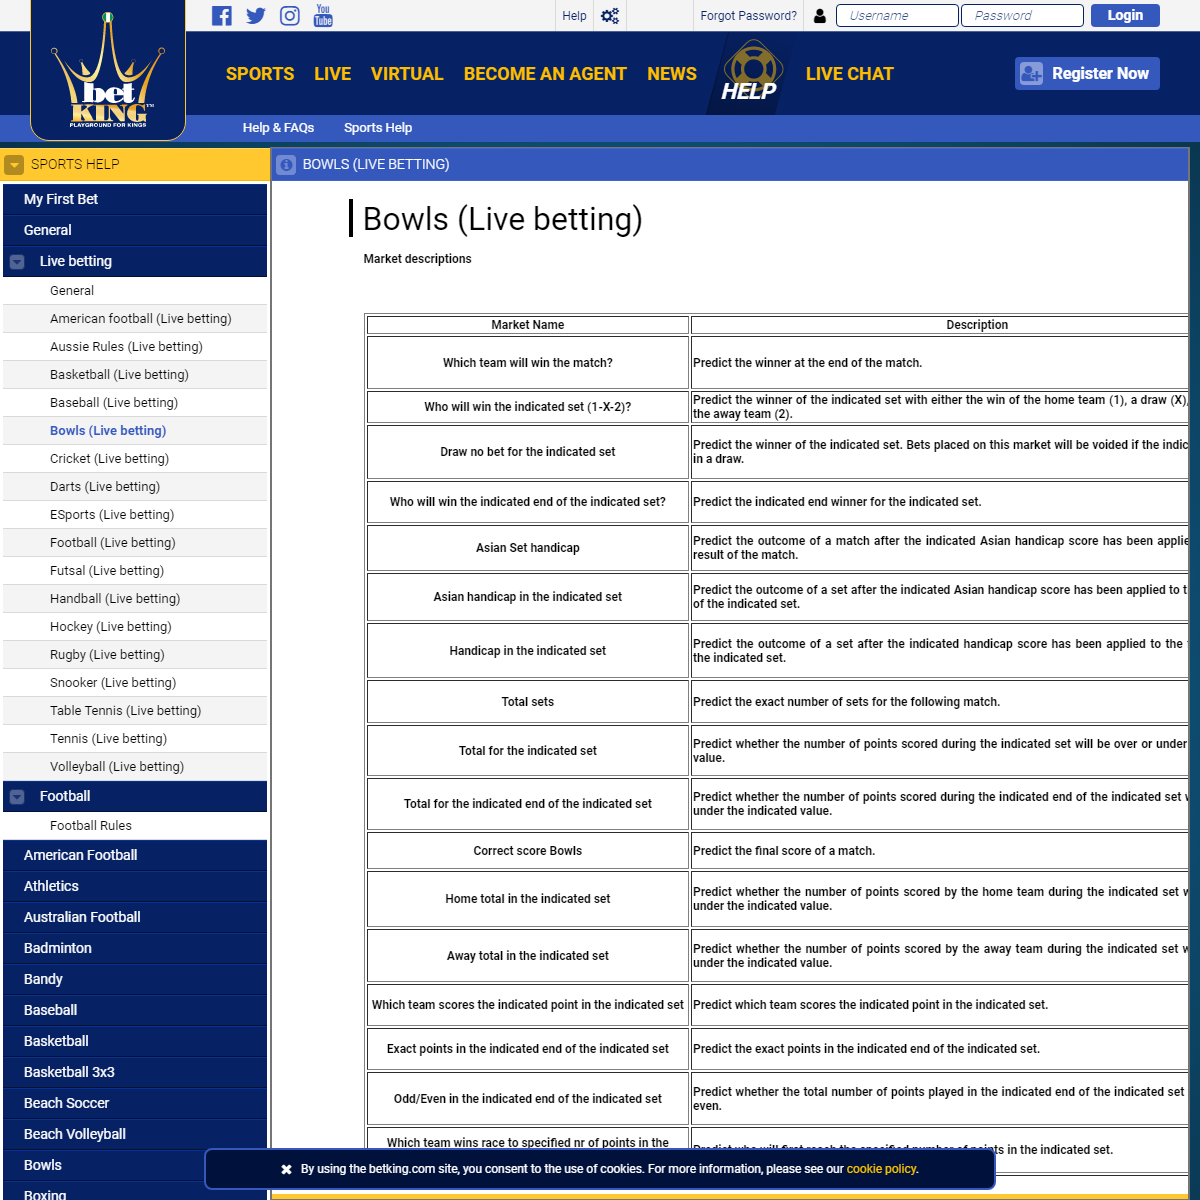 A complete backup of https://www.betking.com/help/sports-help/live-betting/bowls/